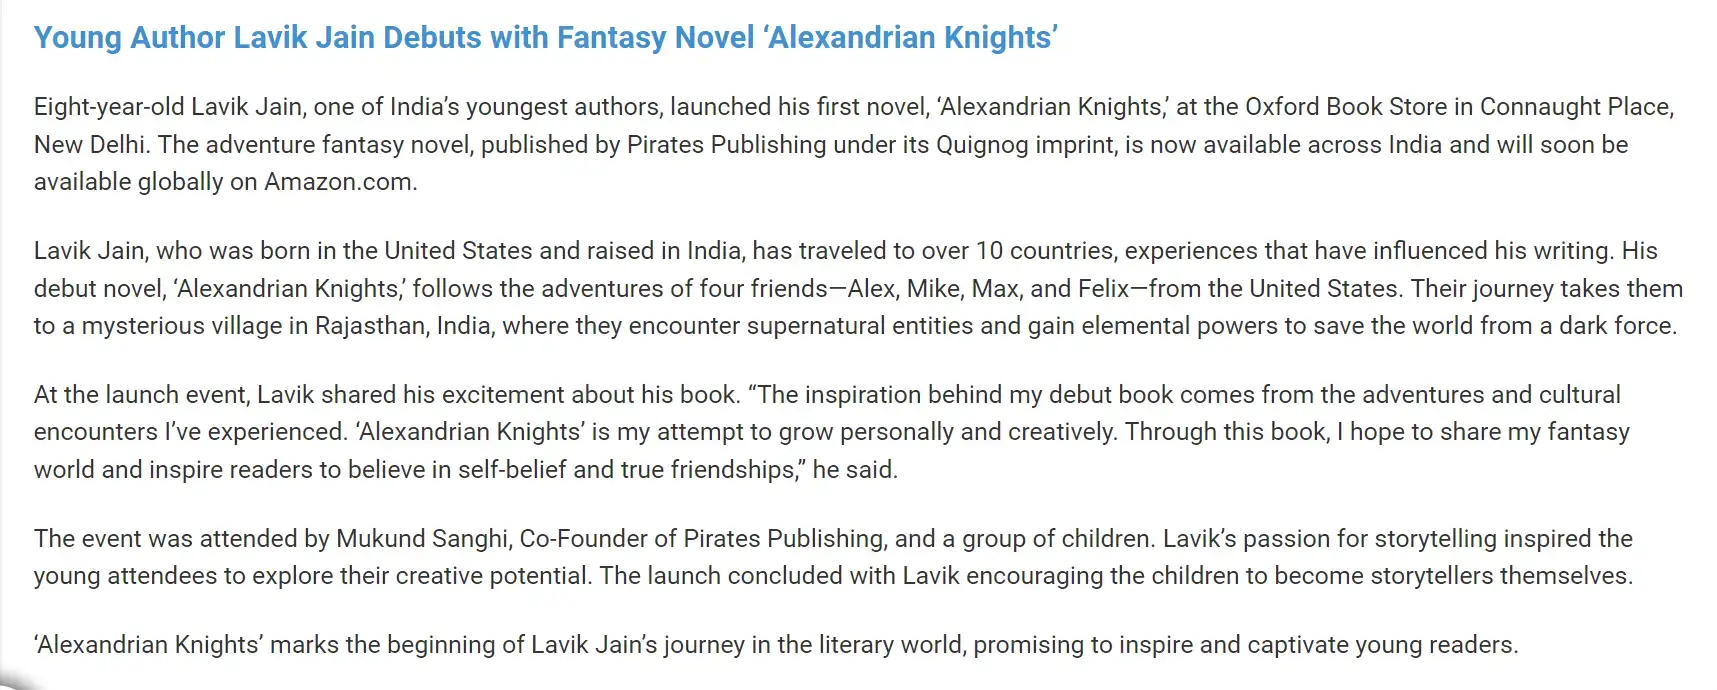 Eight-year-old Lavik Jain authors his debut book ‘Alexandrian Knights’ (4)